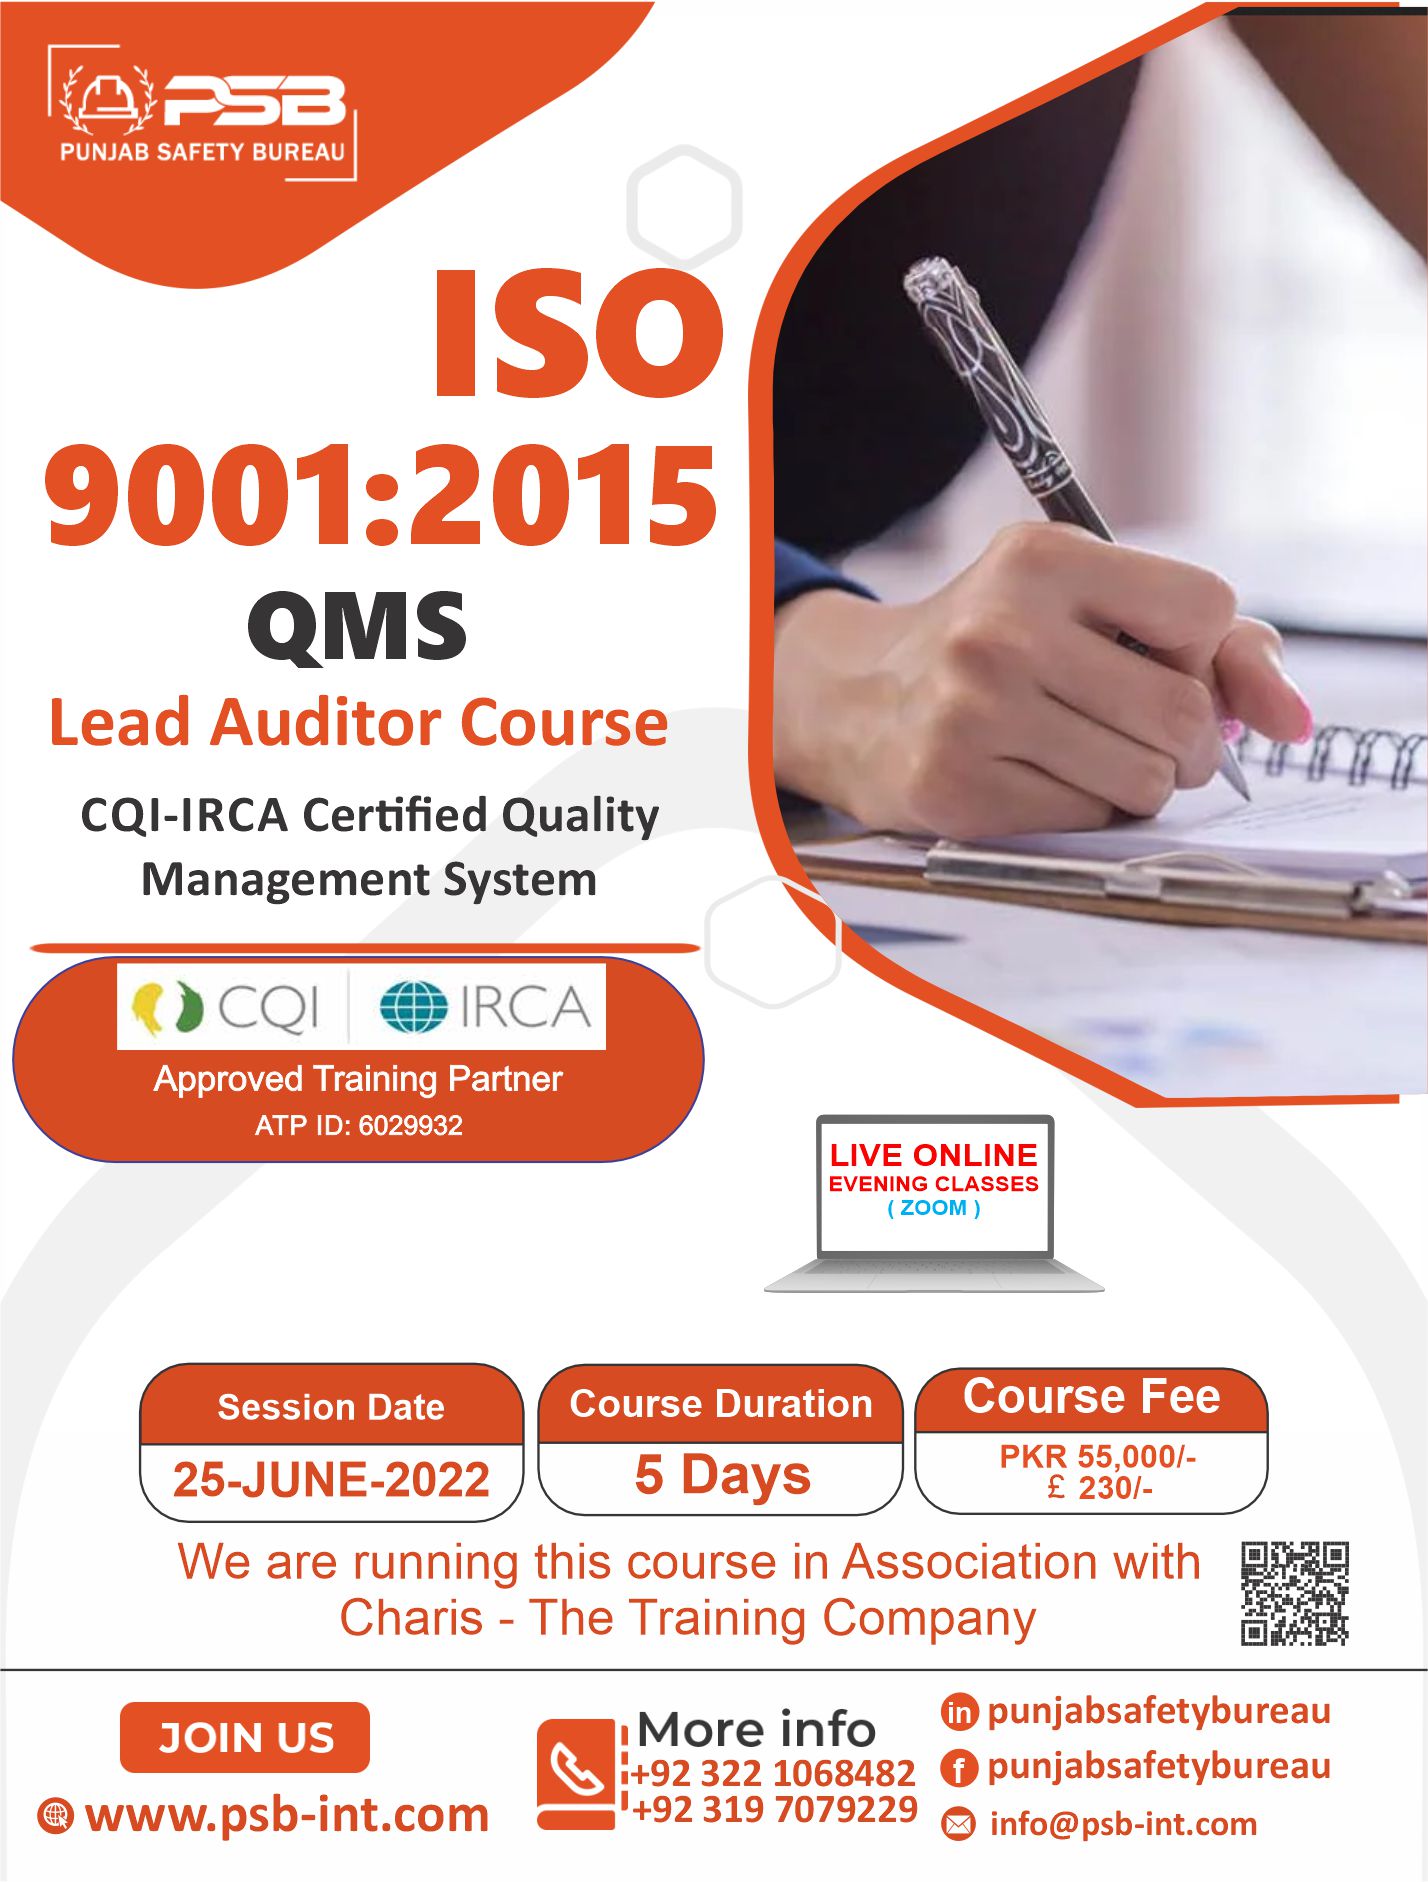 ISO 9001:2015 IRCA-CQI certified Lead Auditor course (QMS) - PSB